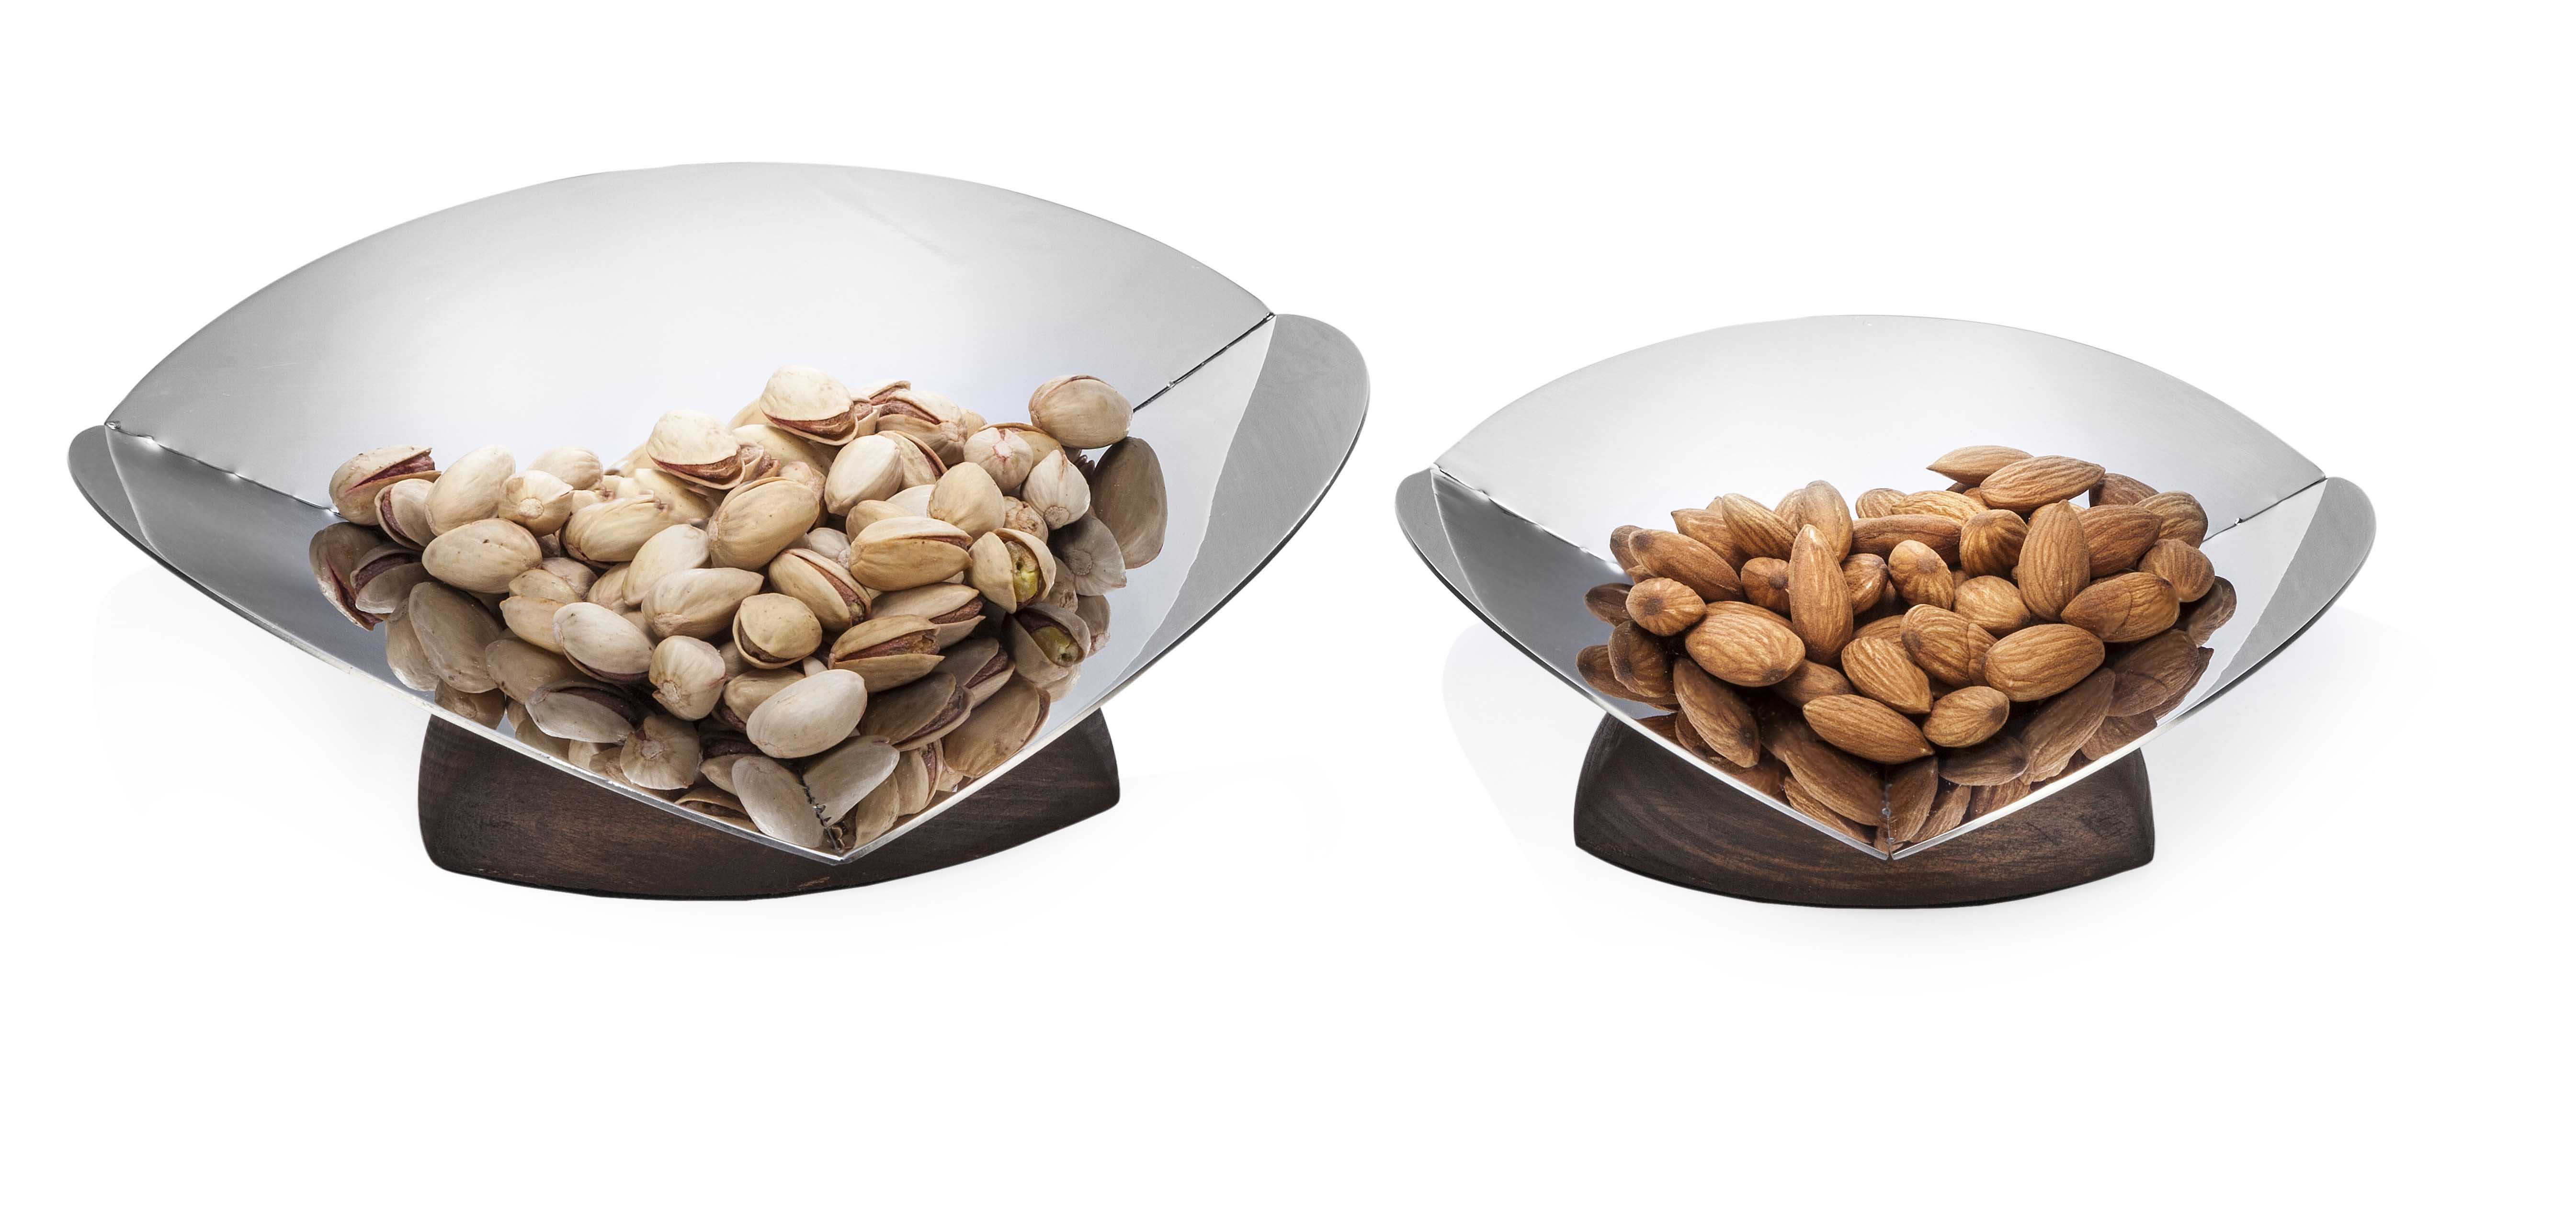 delta-nut-bowls-by-arttdinox-for-rs-1500-large-and-rs-1250-small